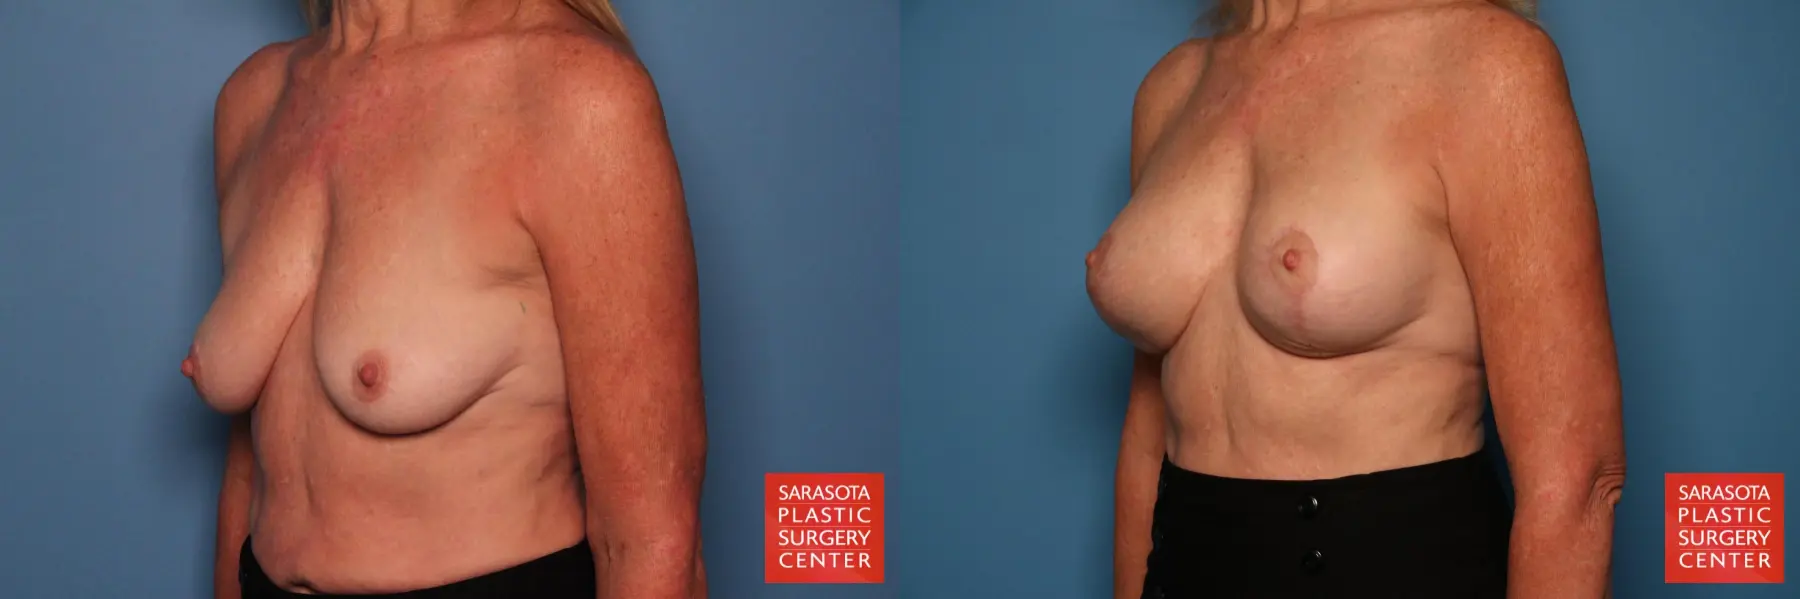 Breast Augmentation With Lift: Patient 7 - Before and After 2